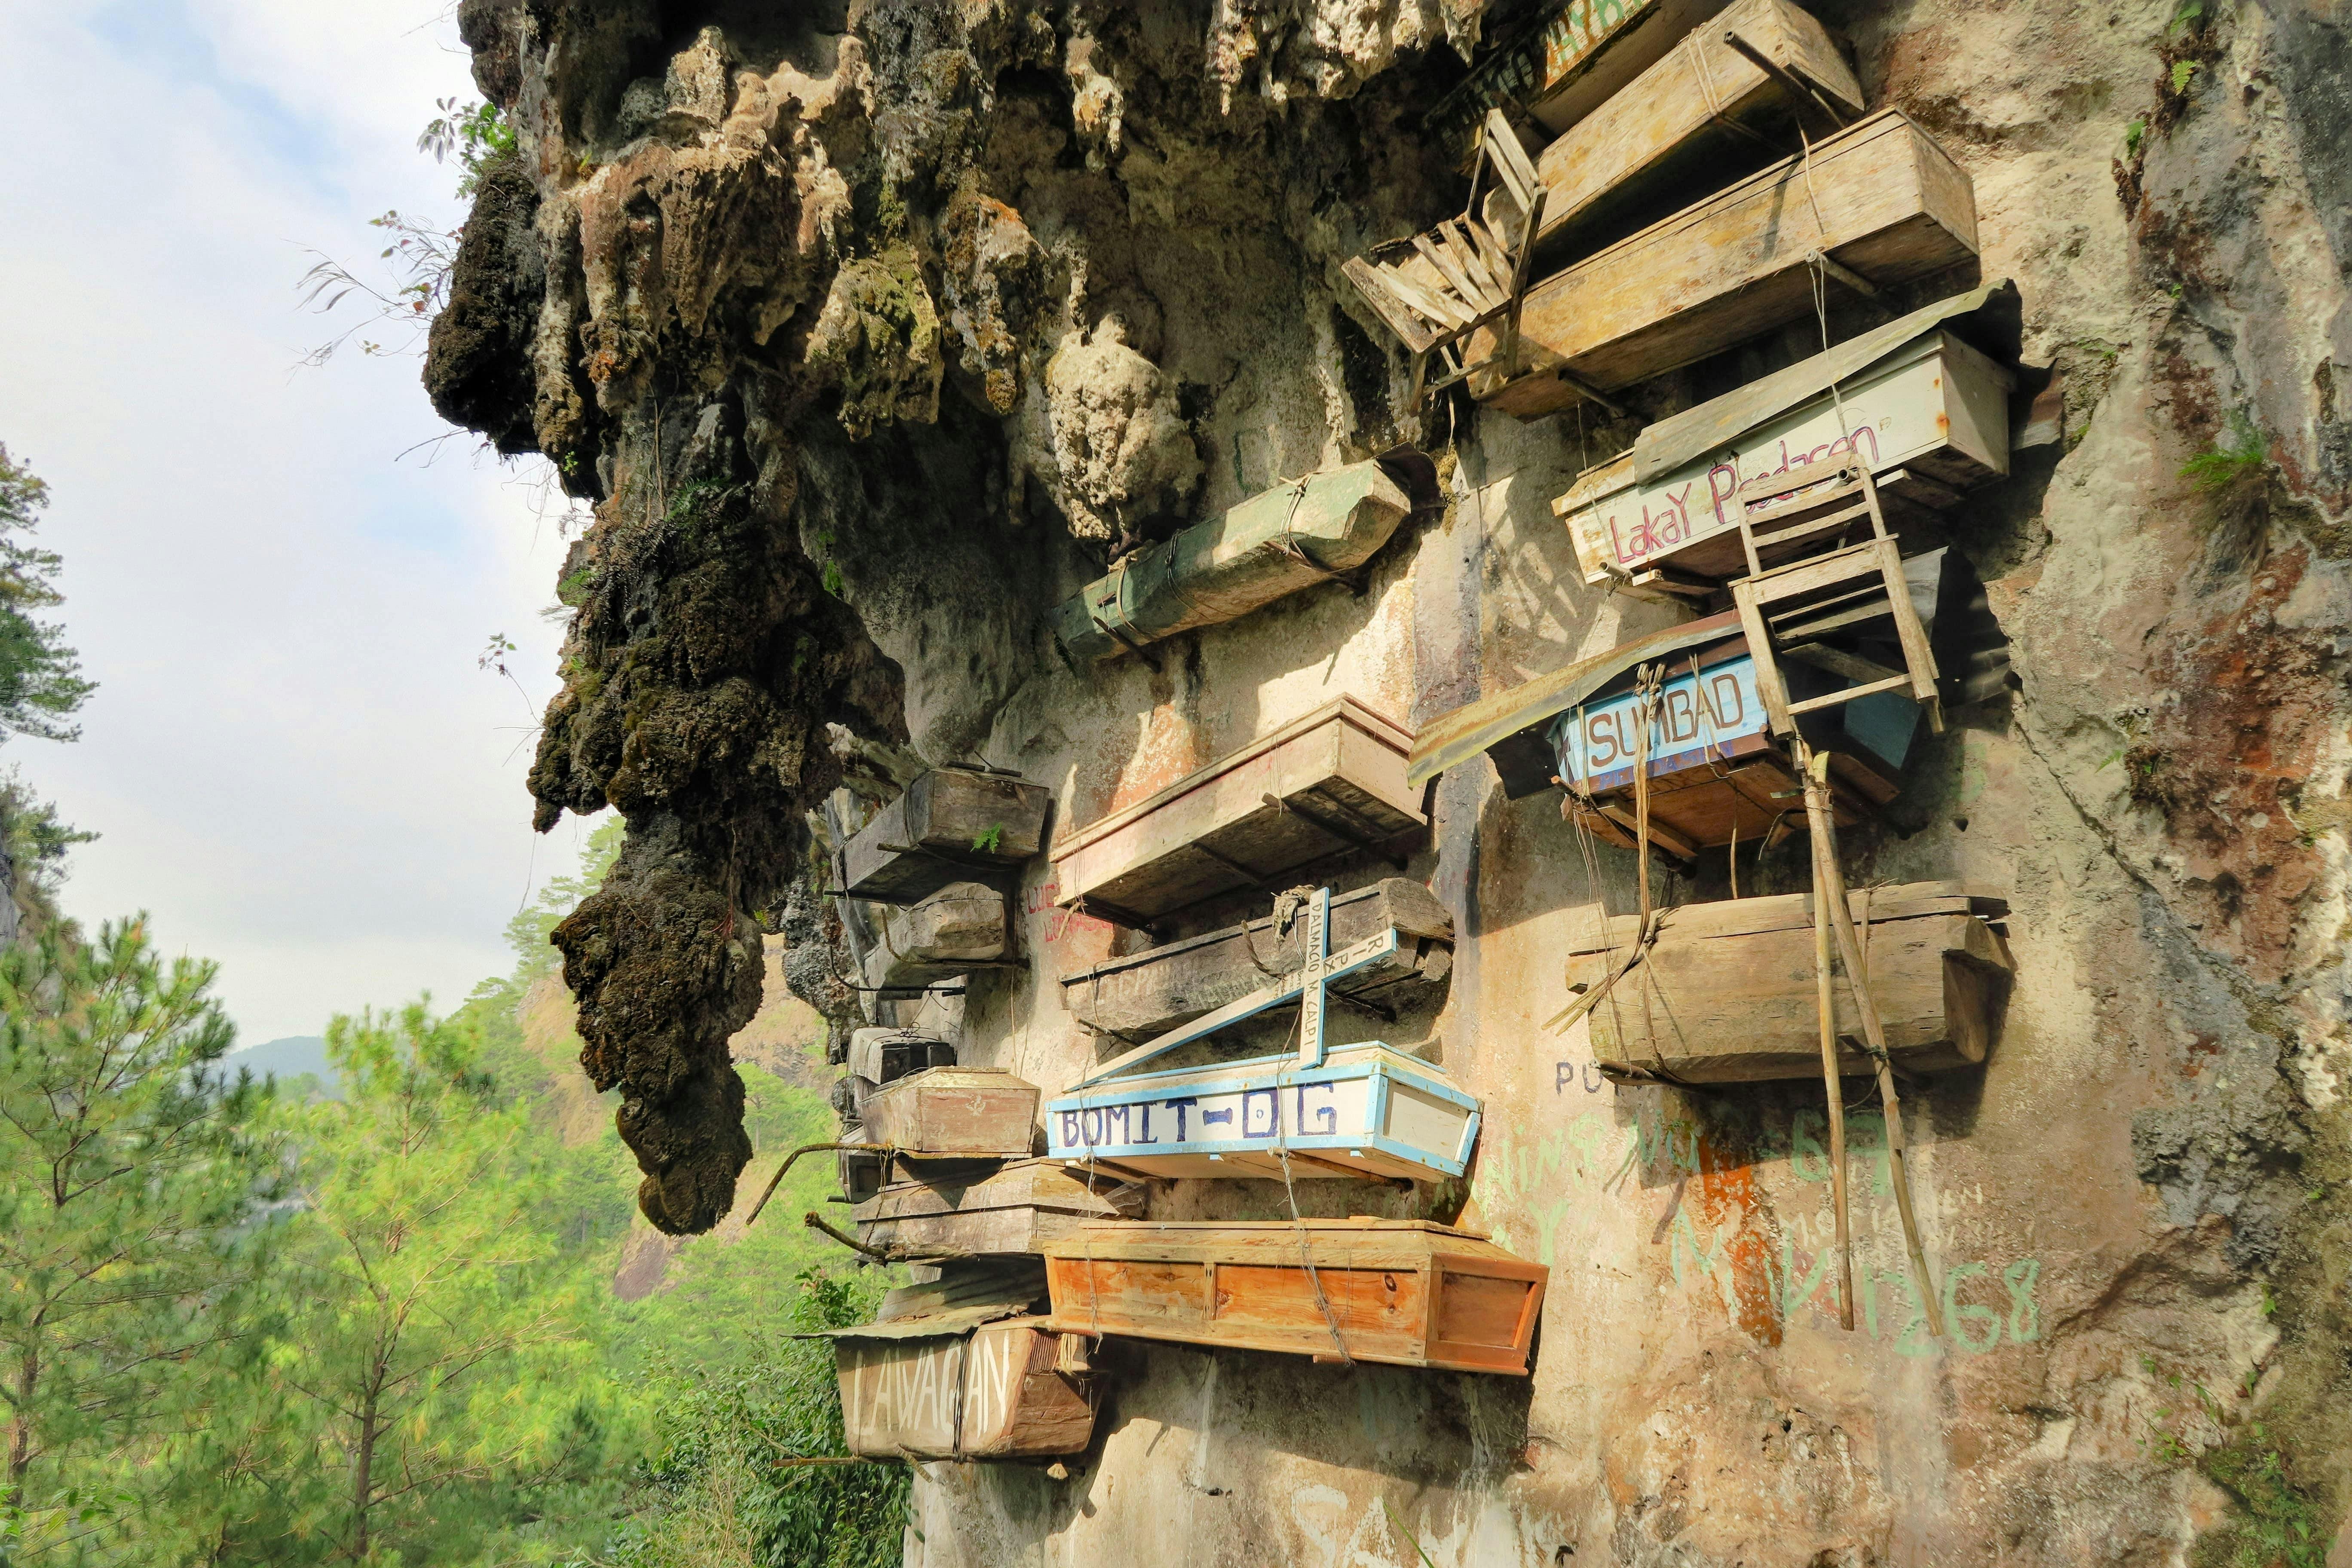 Hanging coffins outside Sugong Cave in Sagada